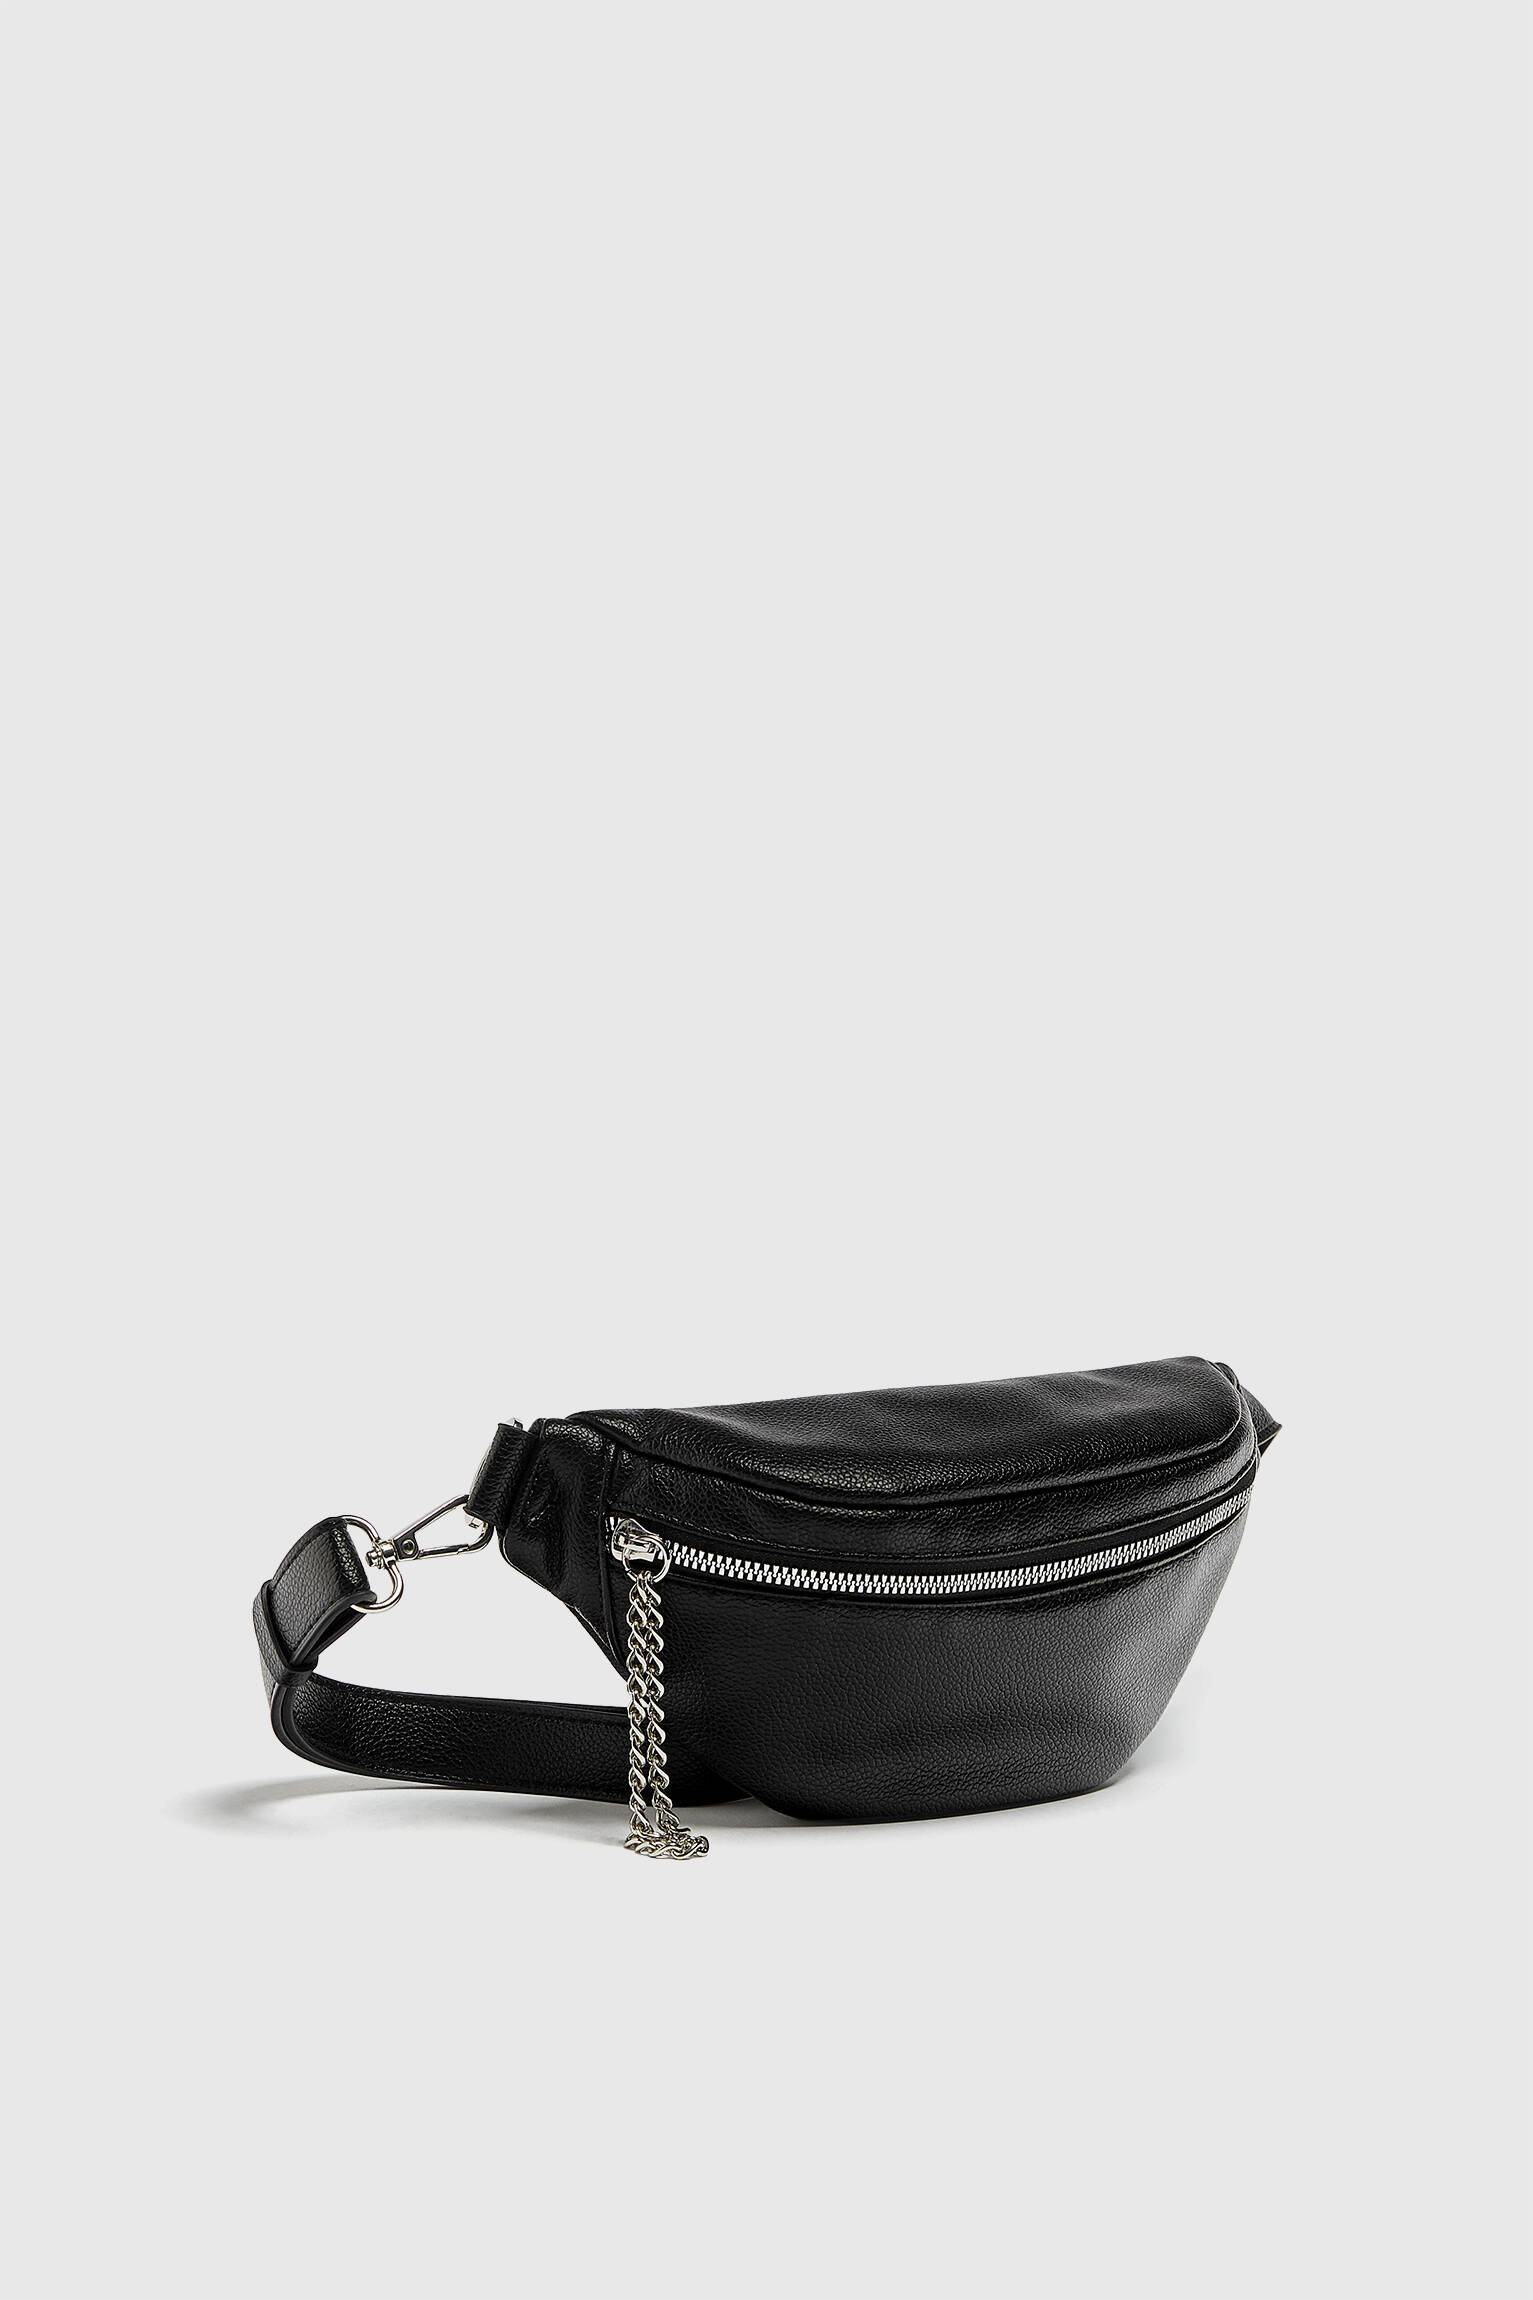 Pull & Bear Fanny pack with chain detail. a black fanny pack with a silver chain hanging from it. 